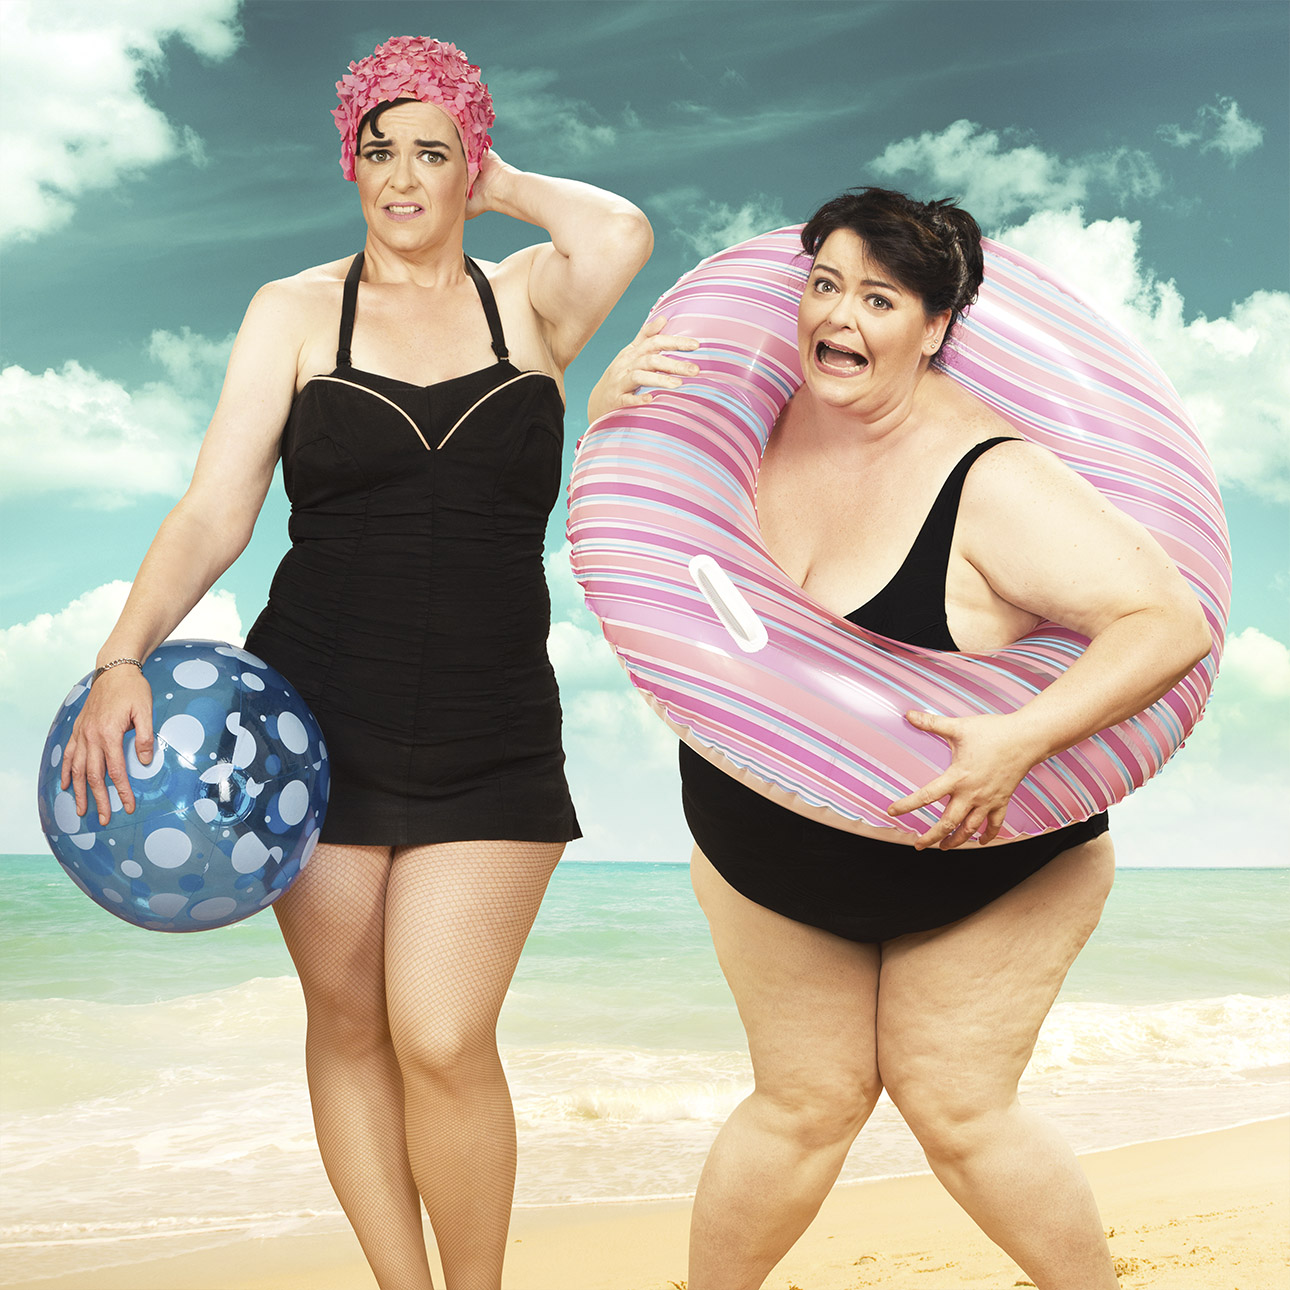 PHOTO: Blake Morrow photographed his friend Beth before and after her dramatic weight-loss, turning the photos into a playful series titled, "The Beth Project" that celebrates his friend's accomplishment. 